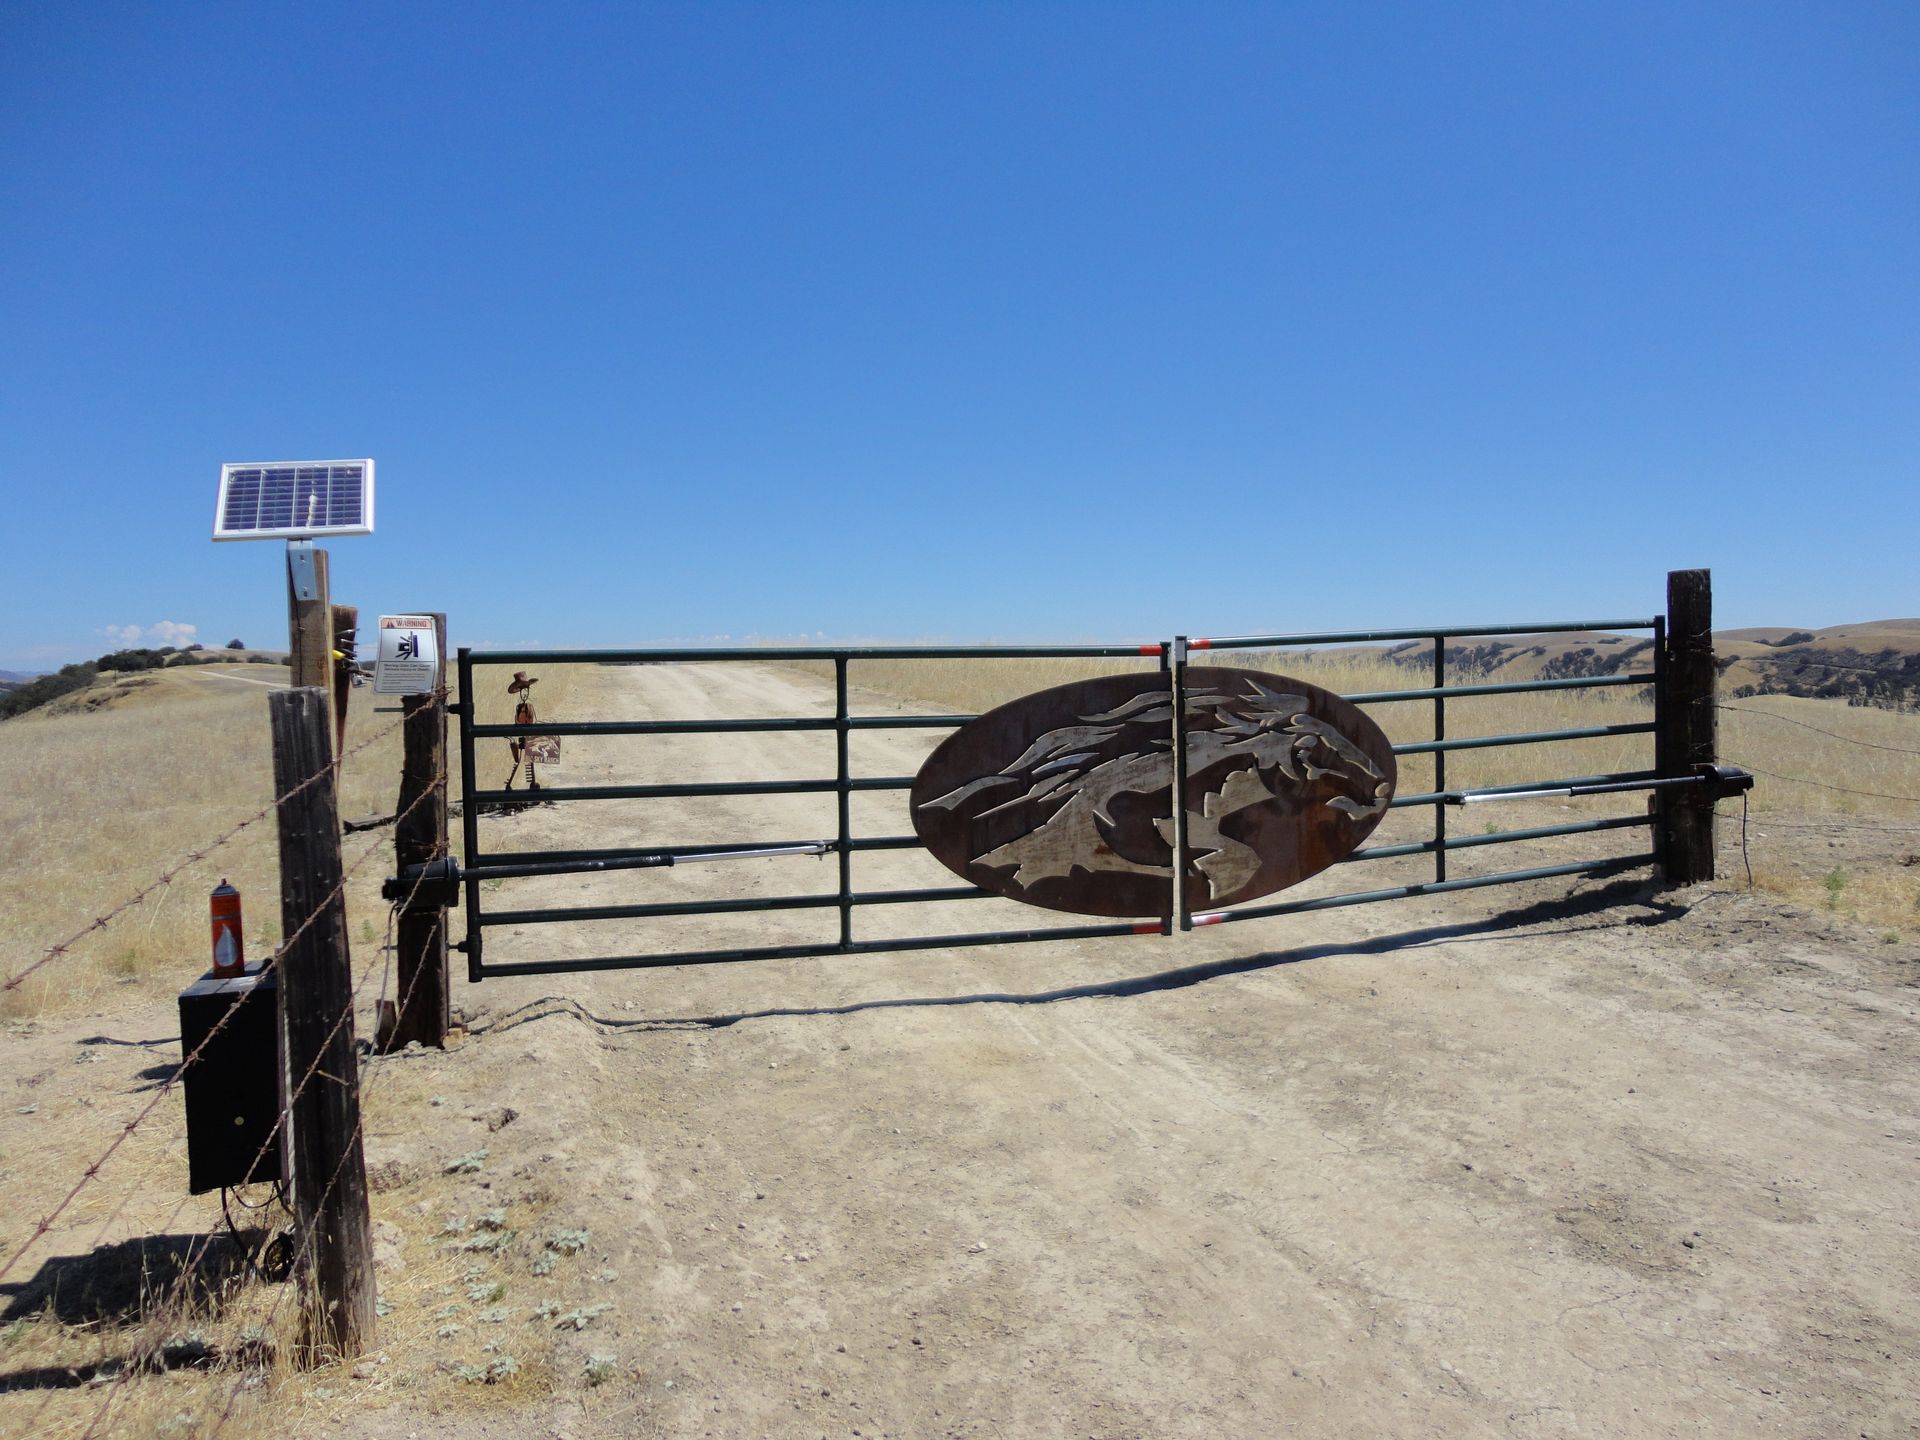 Custom Solar Entry Gate with center logo piece attached to gate.